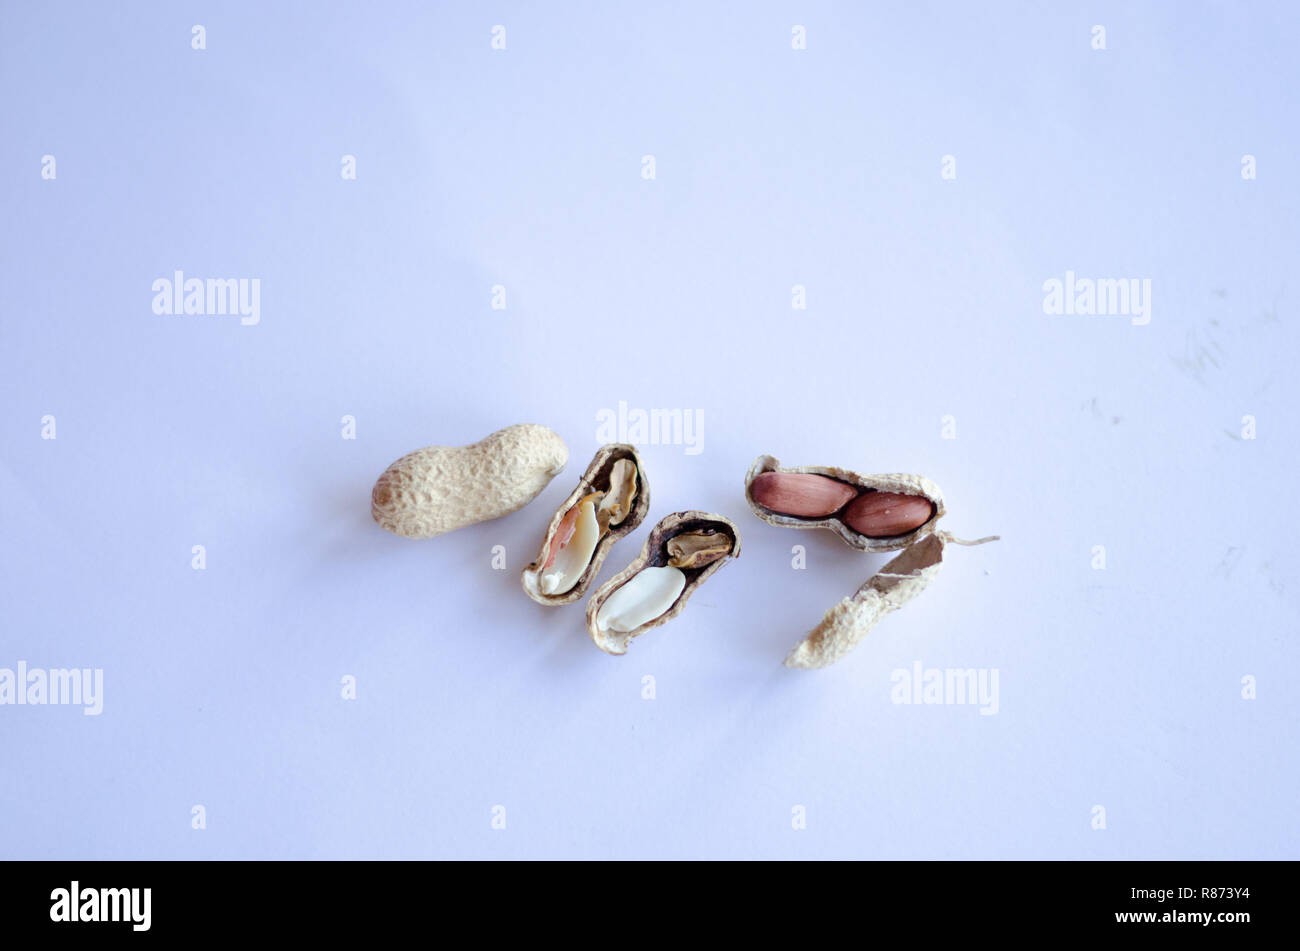 Peanuts on display on white background. One of them cracked with one bad and one good peanut. Stock Photo